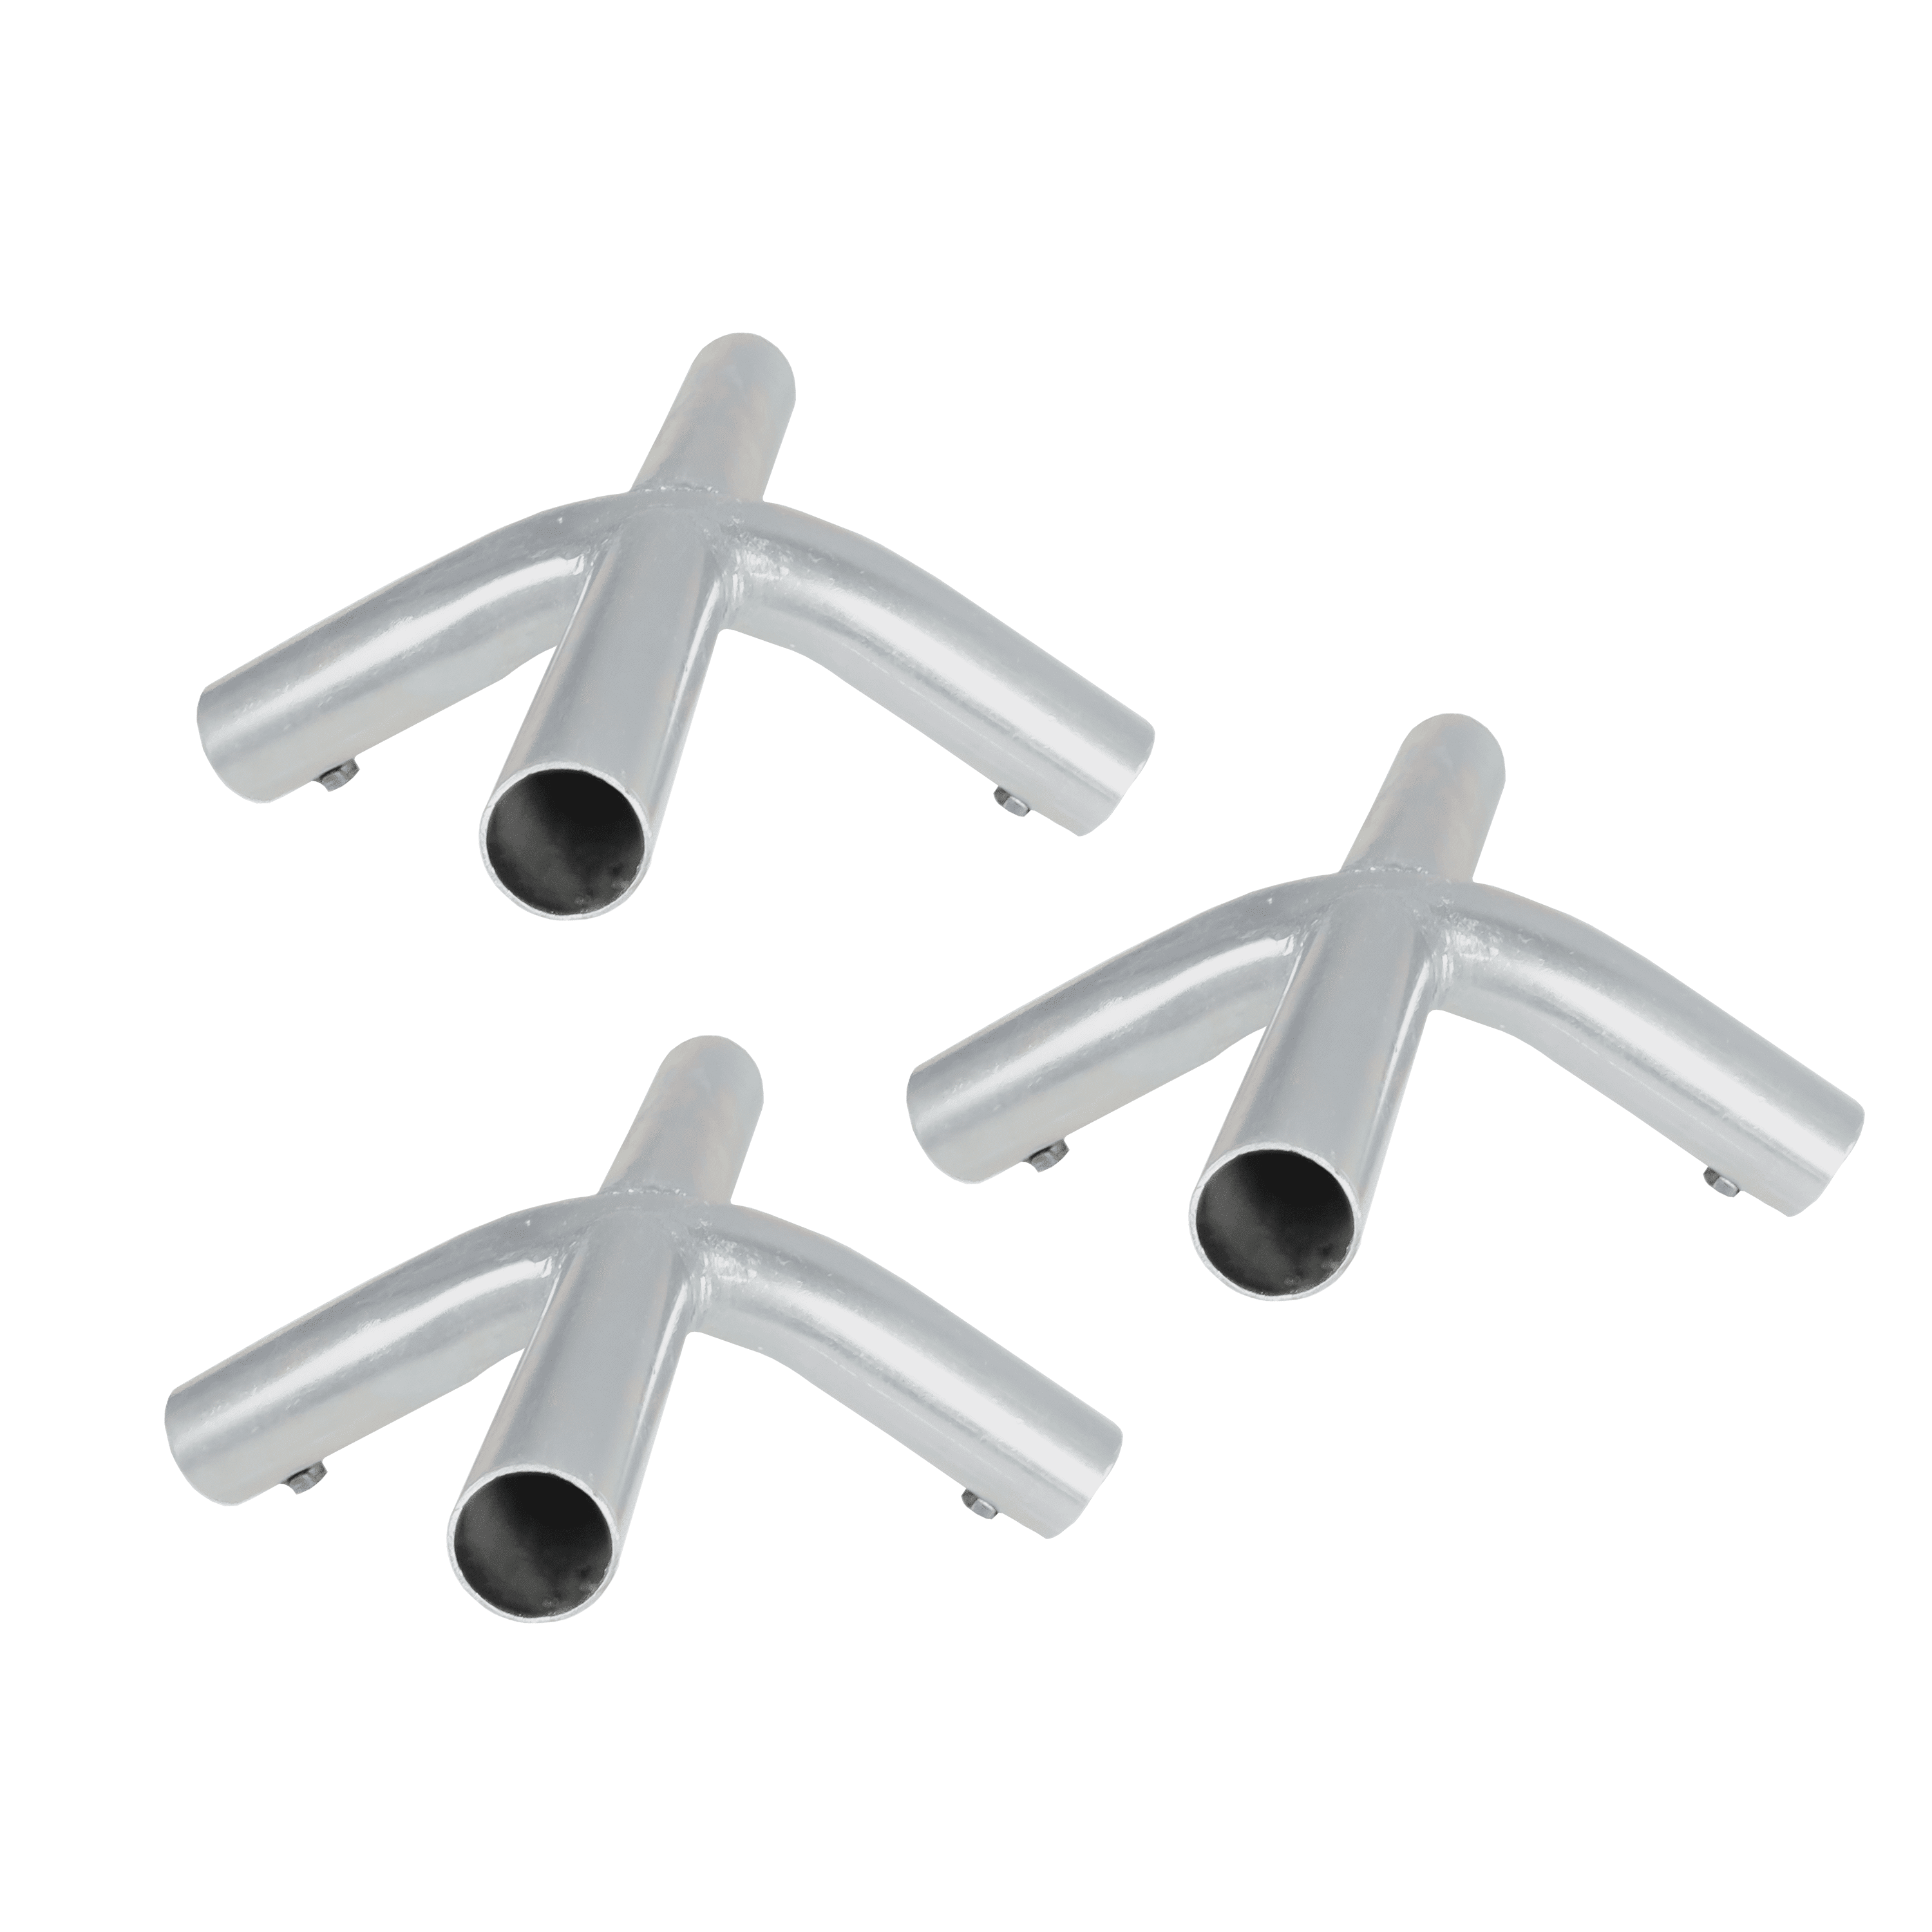 4pc 2 Way Joiner Fitting Pipe Connector Canopy Patio Carport FVFC 1 3/8" pipe 